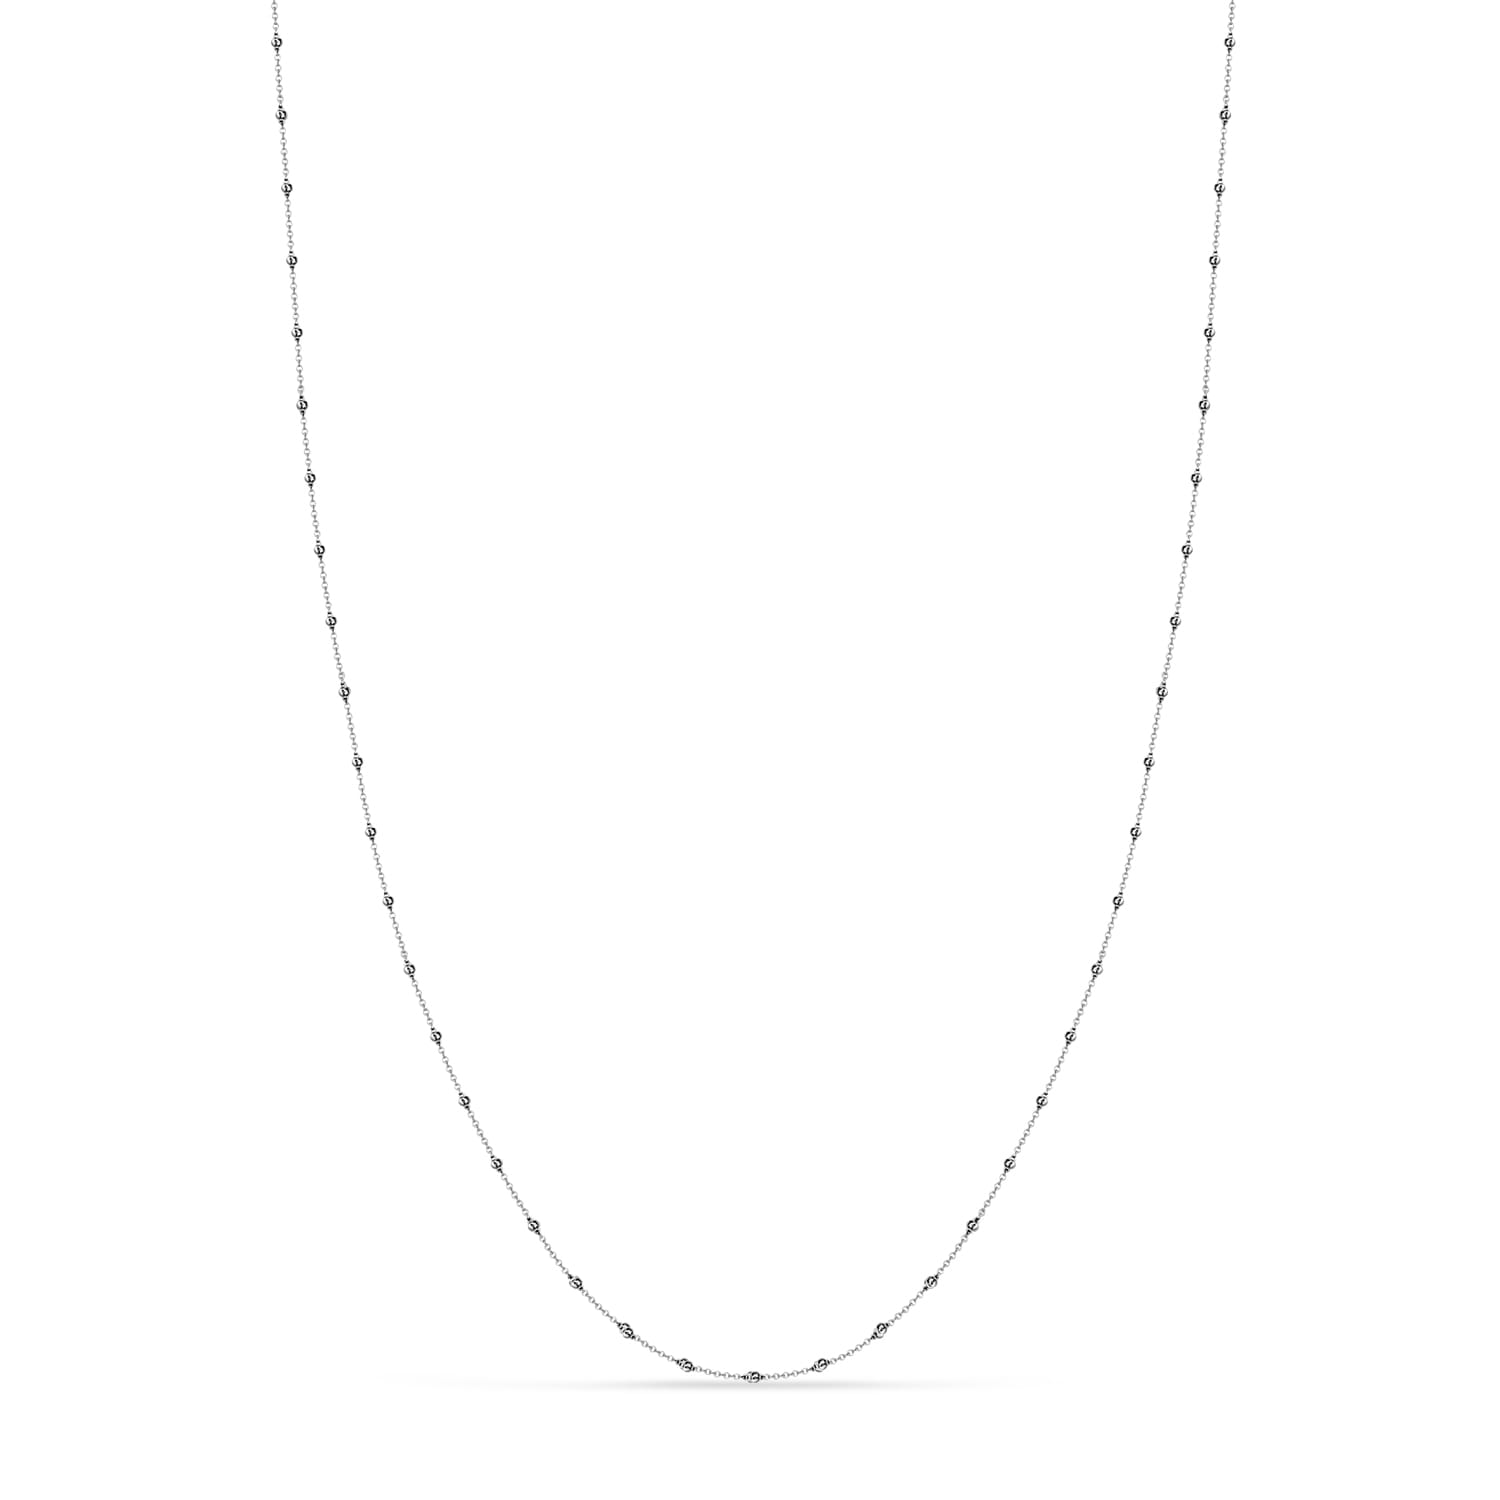 Cable Chain Necklace With Beads 14k White Gold